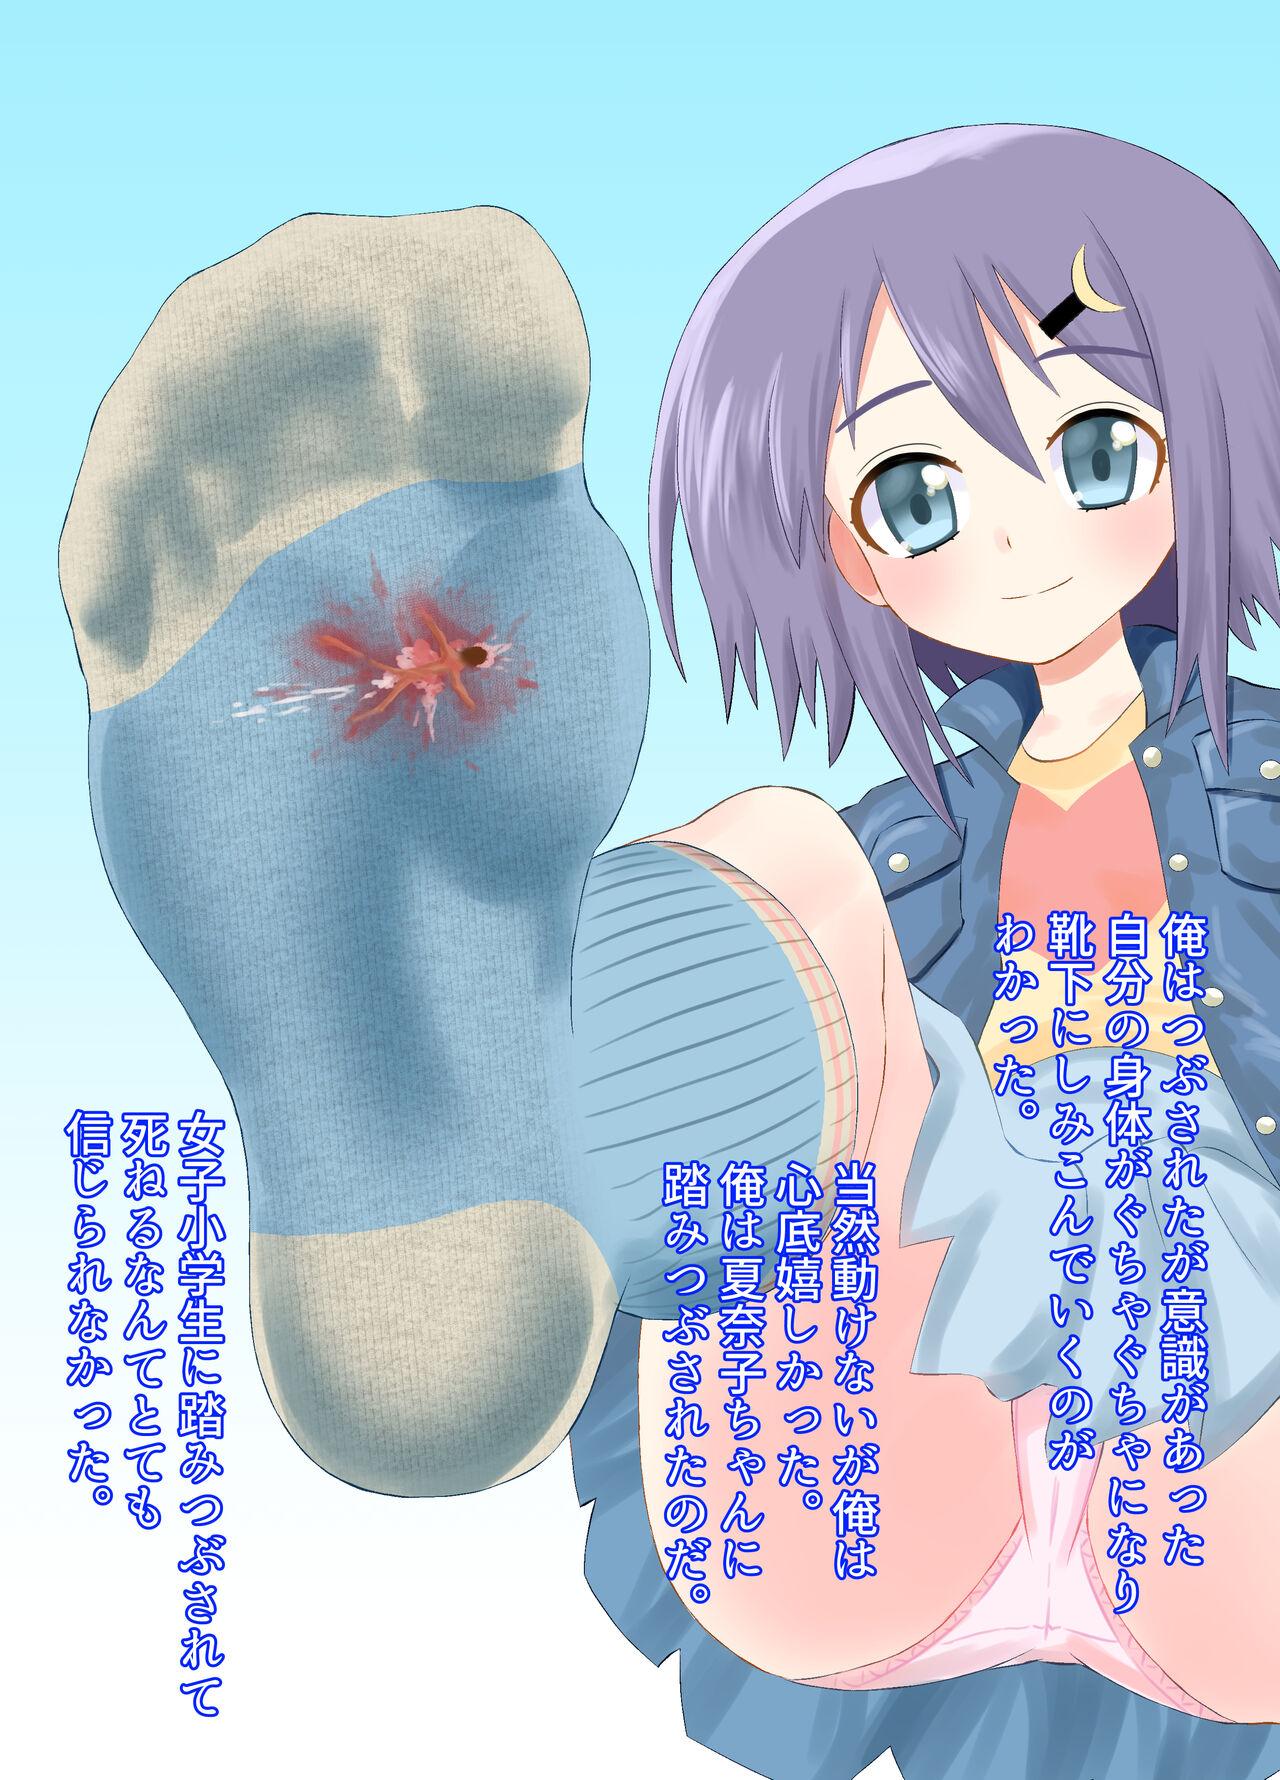 A CG collection of getting smaller and being stepped on by a girl 41